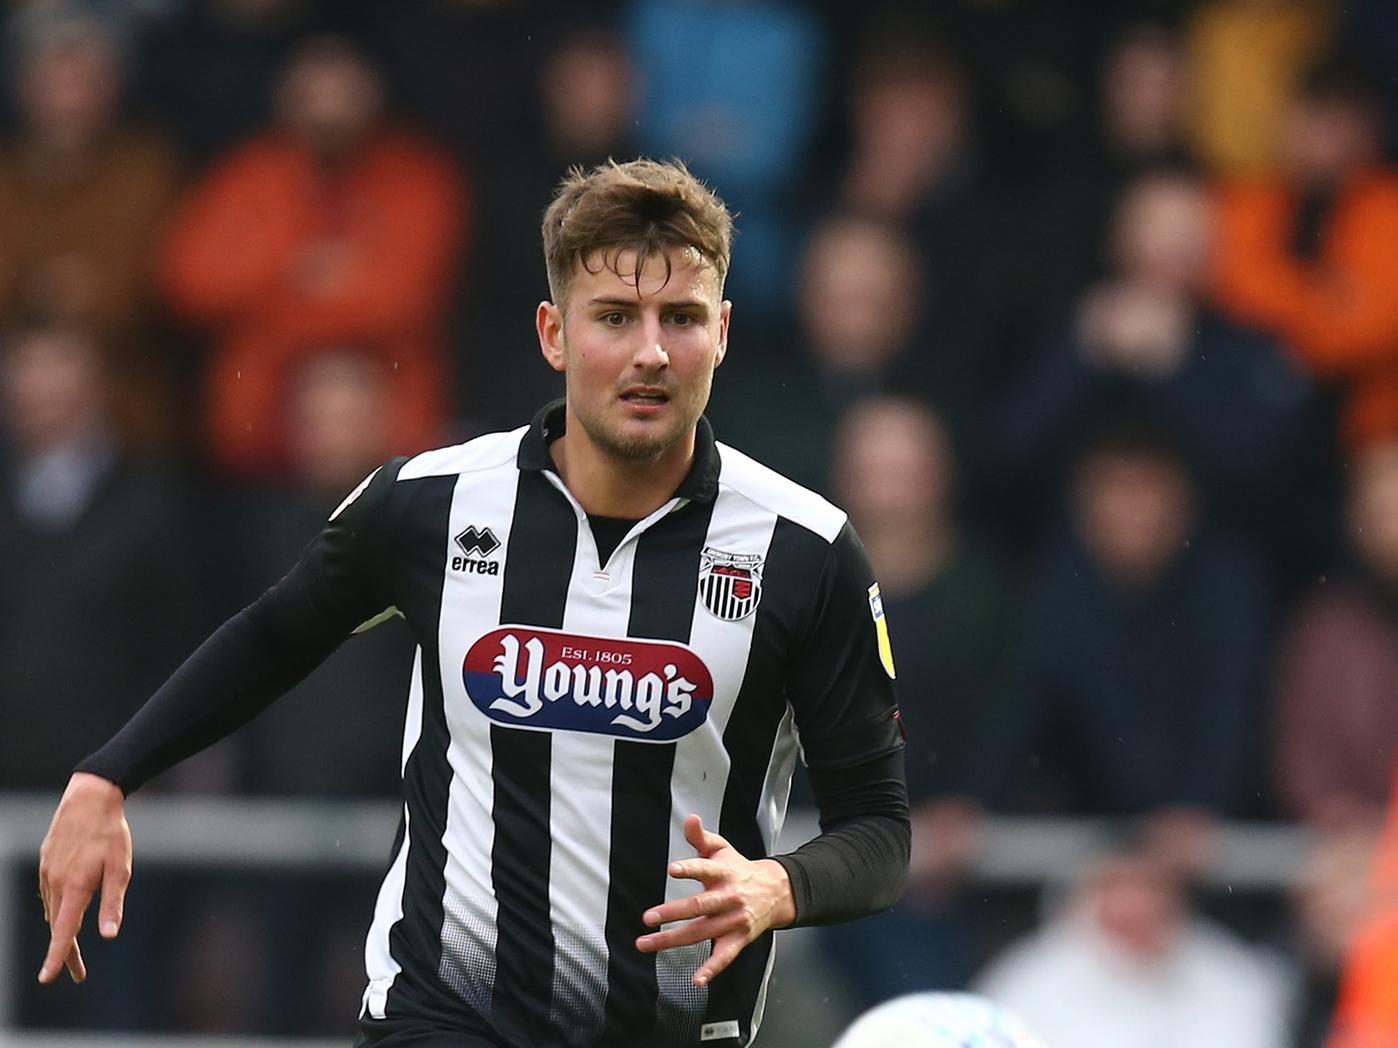 Phil Parkinson has reportedly held initial talks with Ethan Robson as he weighs whether to recall the youngster from loan club Grimsby Town. (Sunderland Echo)